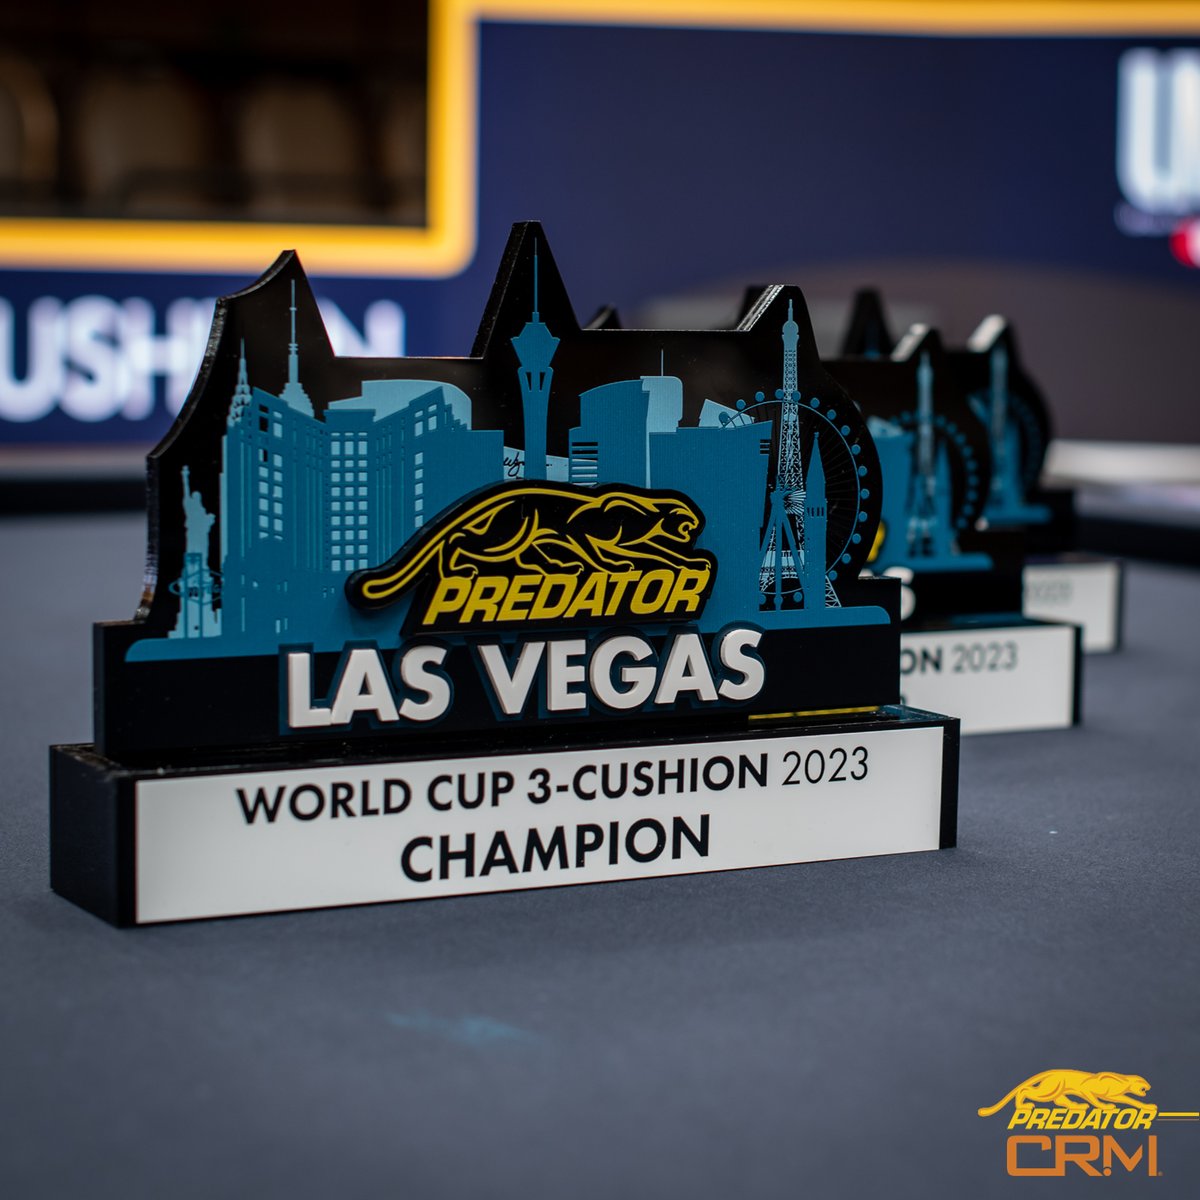 #TBT to the Las Vegas World Cup last February.
Who was there to witness all the action?
We were! 🙋
#3Cushion #CaromPool #CRMPool #WinningTrophy #WorldCup #PredatorCRM